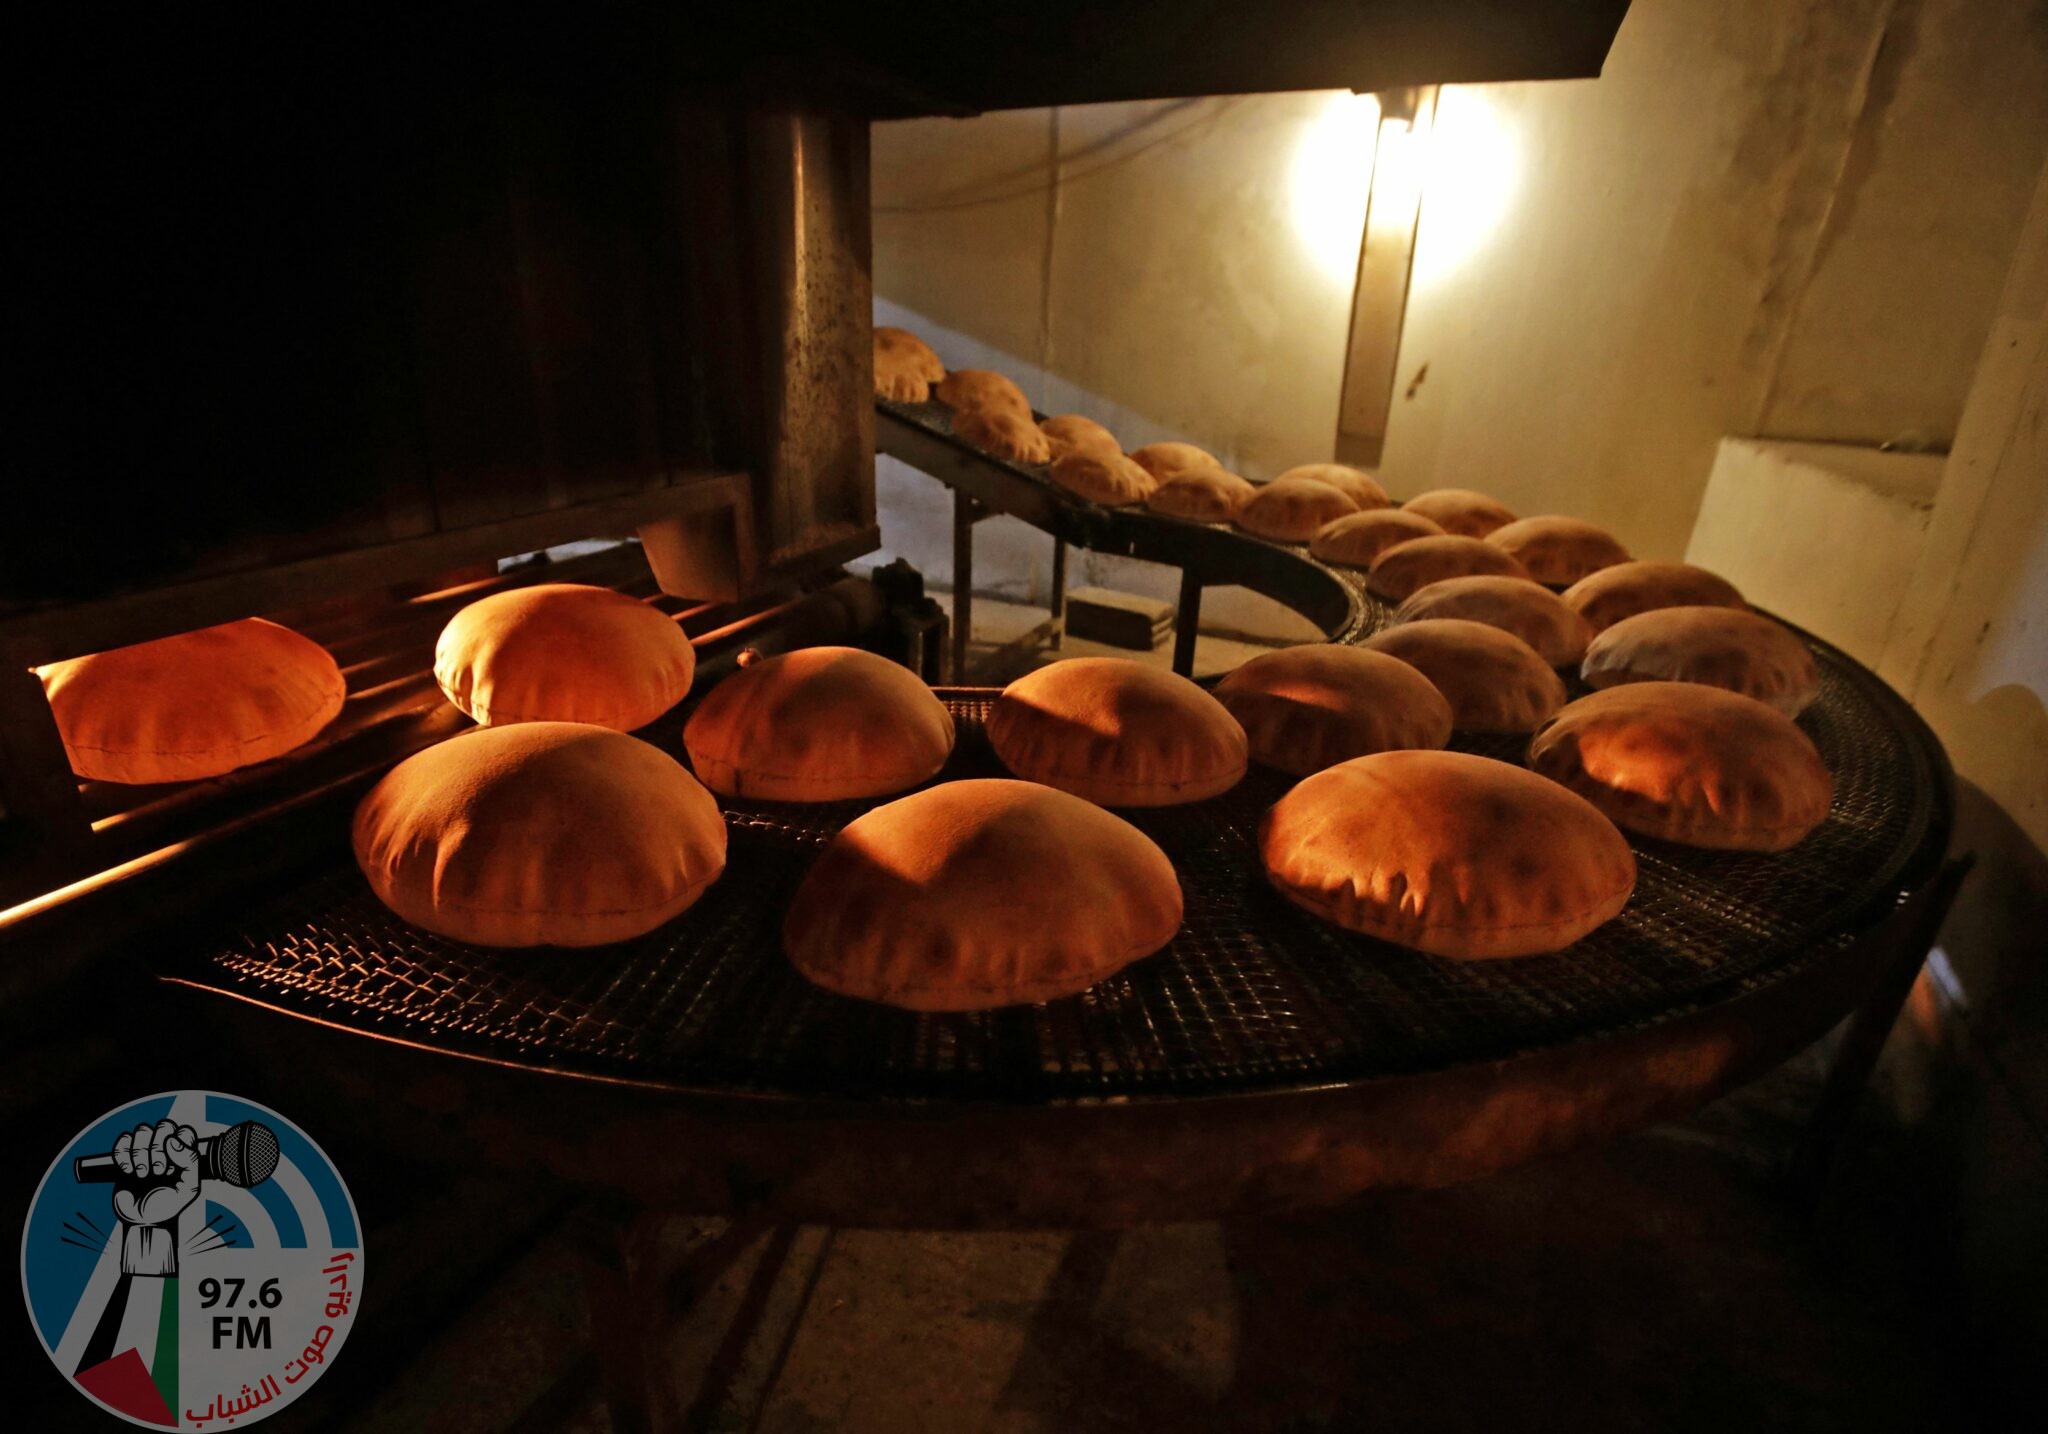 (FILES) In this file photo taken on July 1, 2020 freshly-baked bread moves along a production line out of an oven at an automated bakery in Lebanon's capital Beirut. Russia's invasion of Ukraine could mean less bread on the table in Egypt, Lebanon, Yemen and elsewhere in the Arab world where millions already struggle to survive. The region is heavily dependent on wheat supplies from the two countries which are now at war, and any shortages of the staple food have potential to bring unrest. (Photo by JOSEPH EID / AFP)